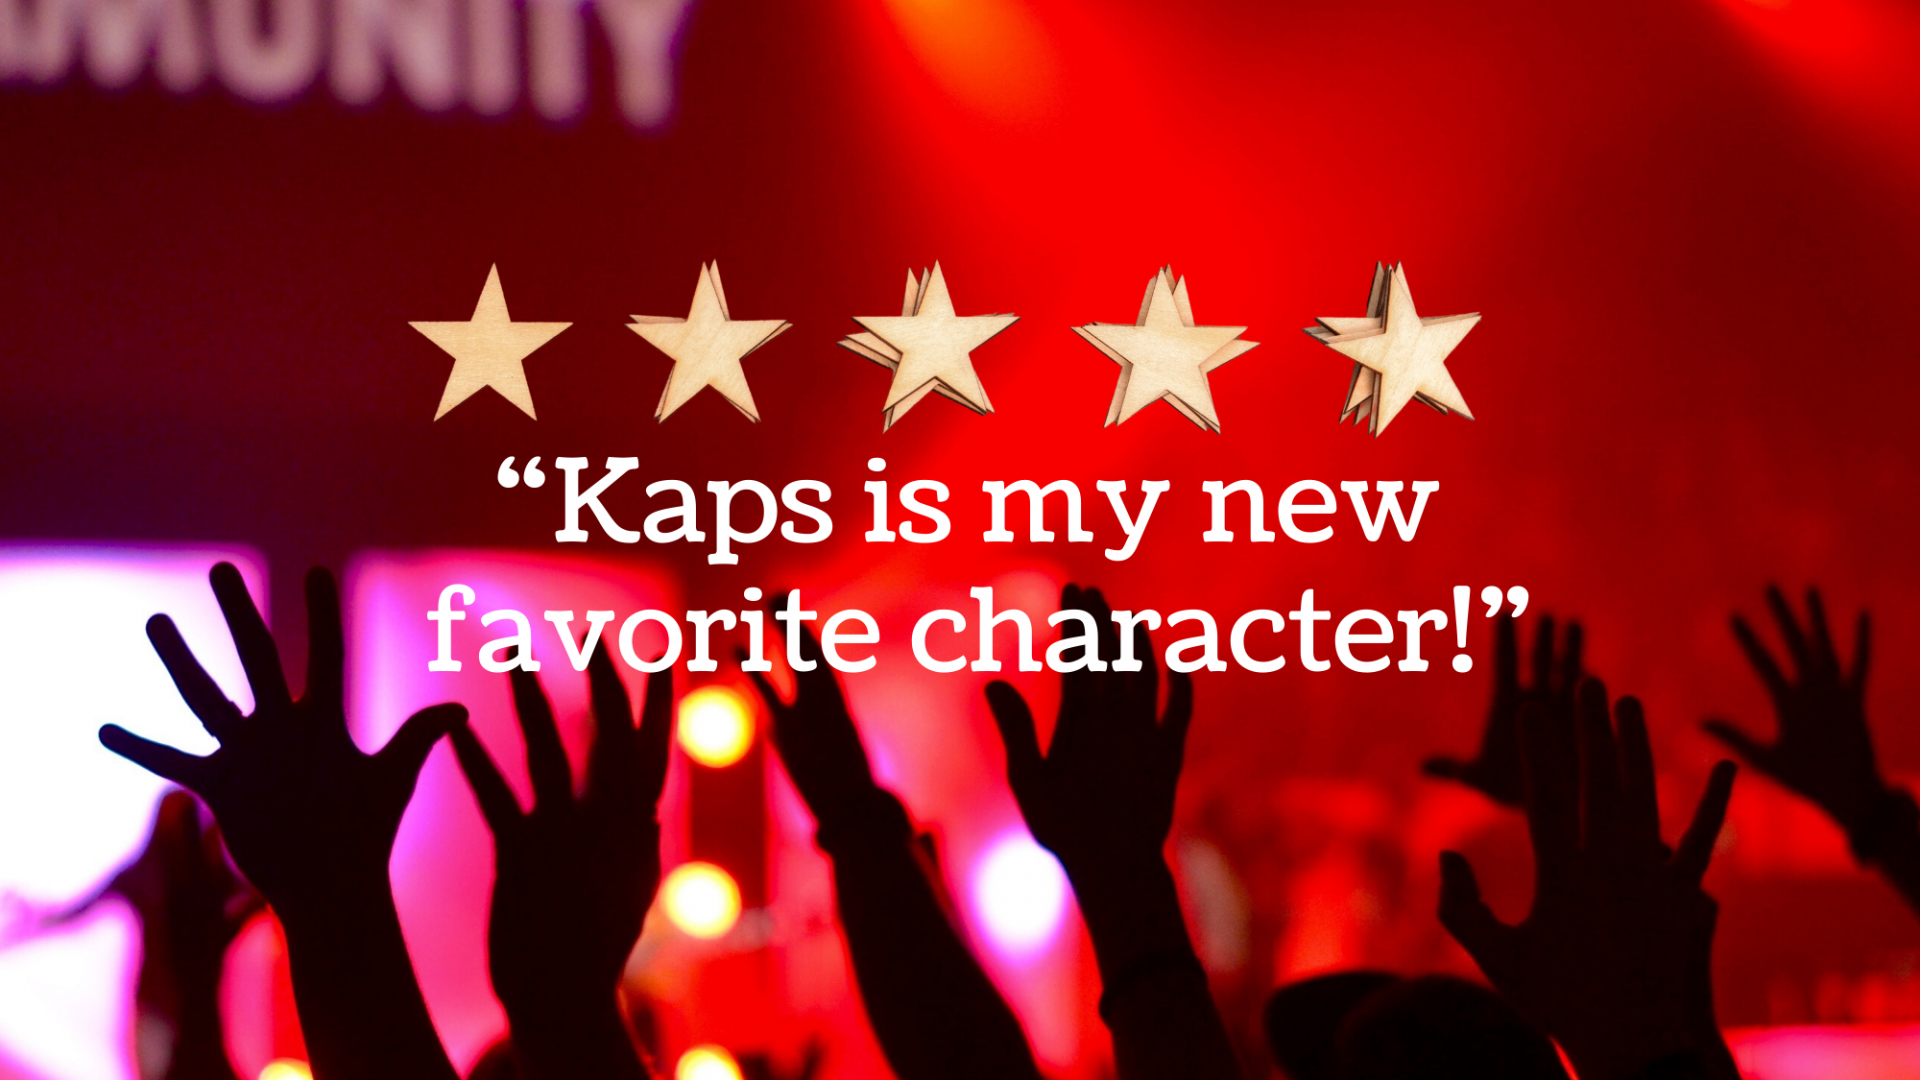 Early Reviews Are In For KAPS!